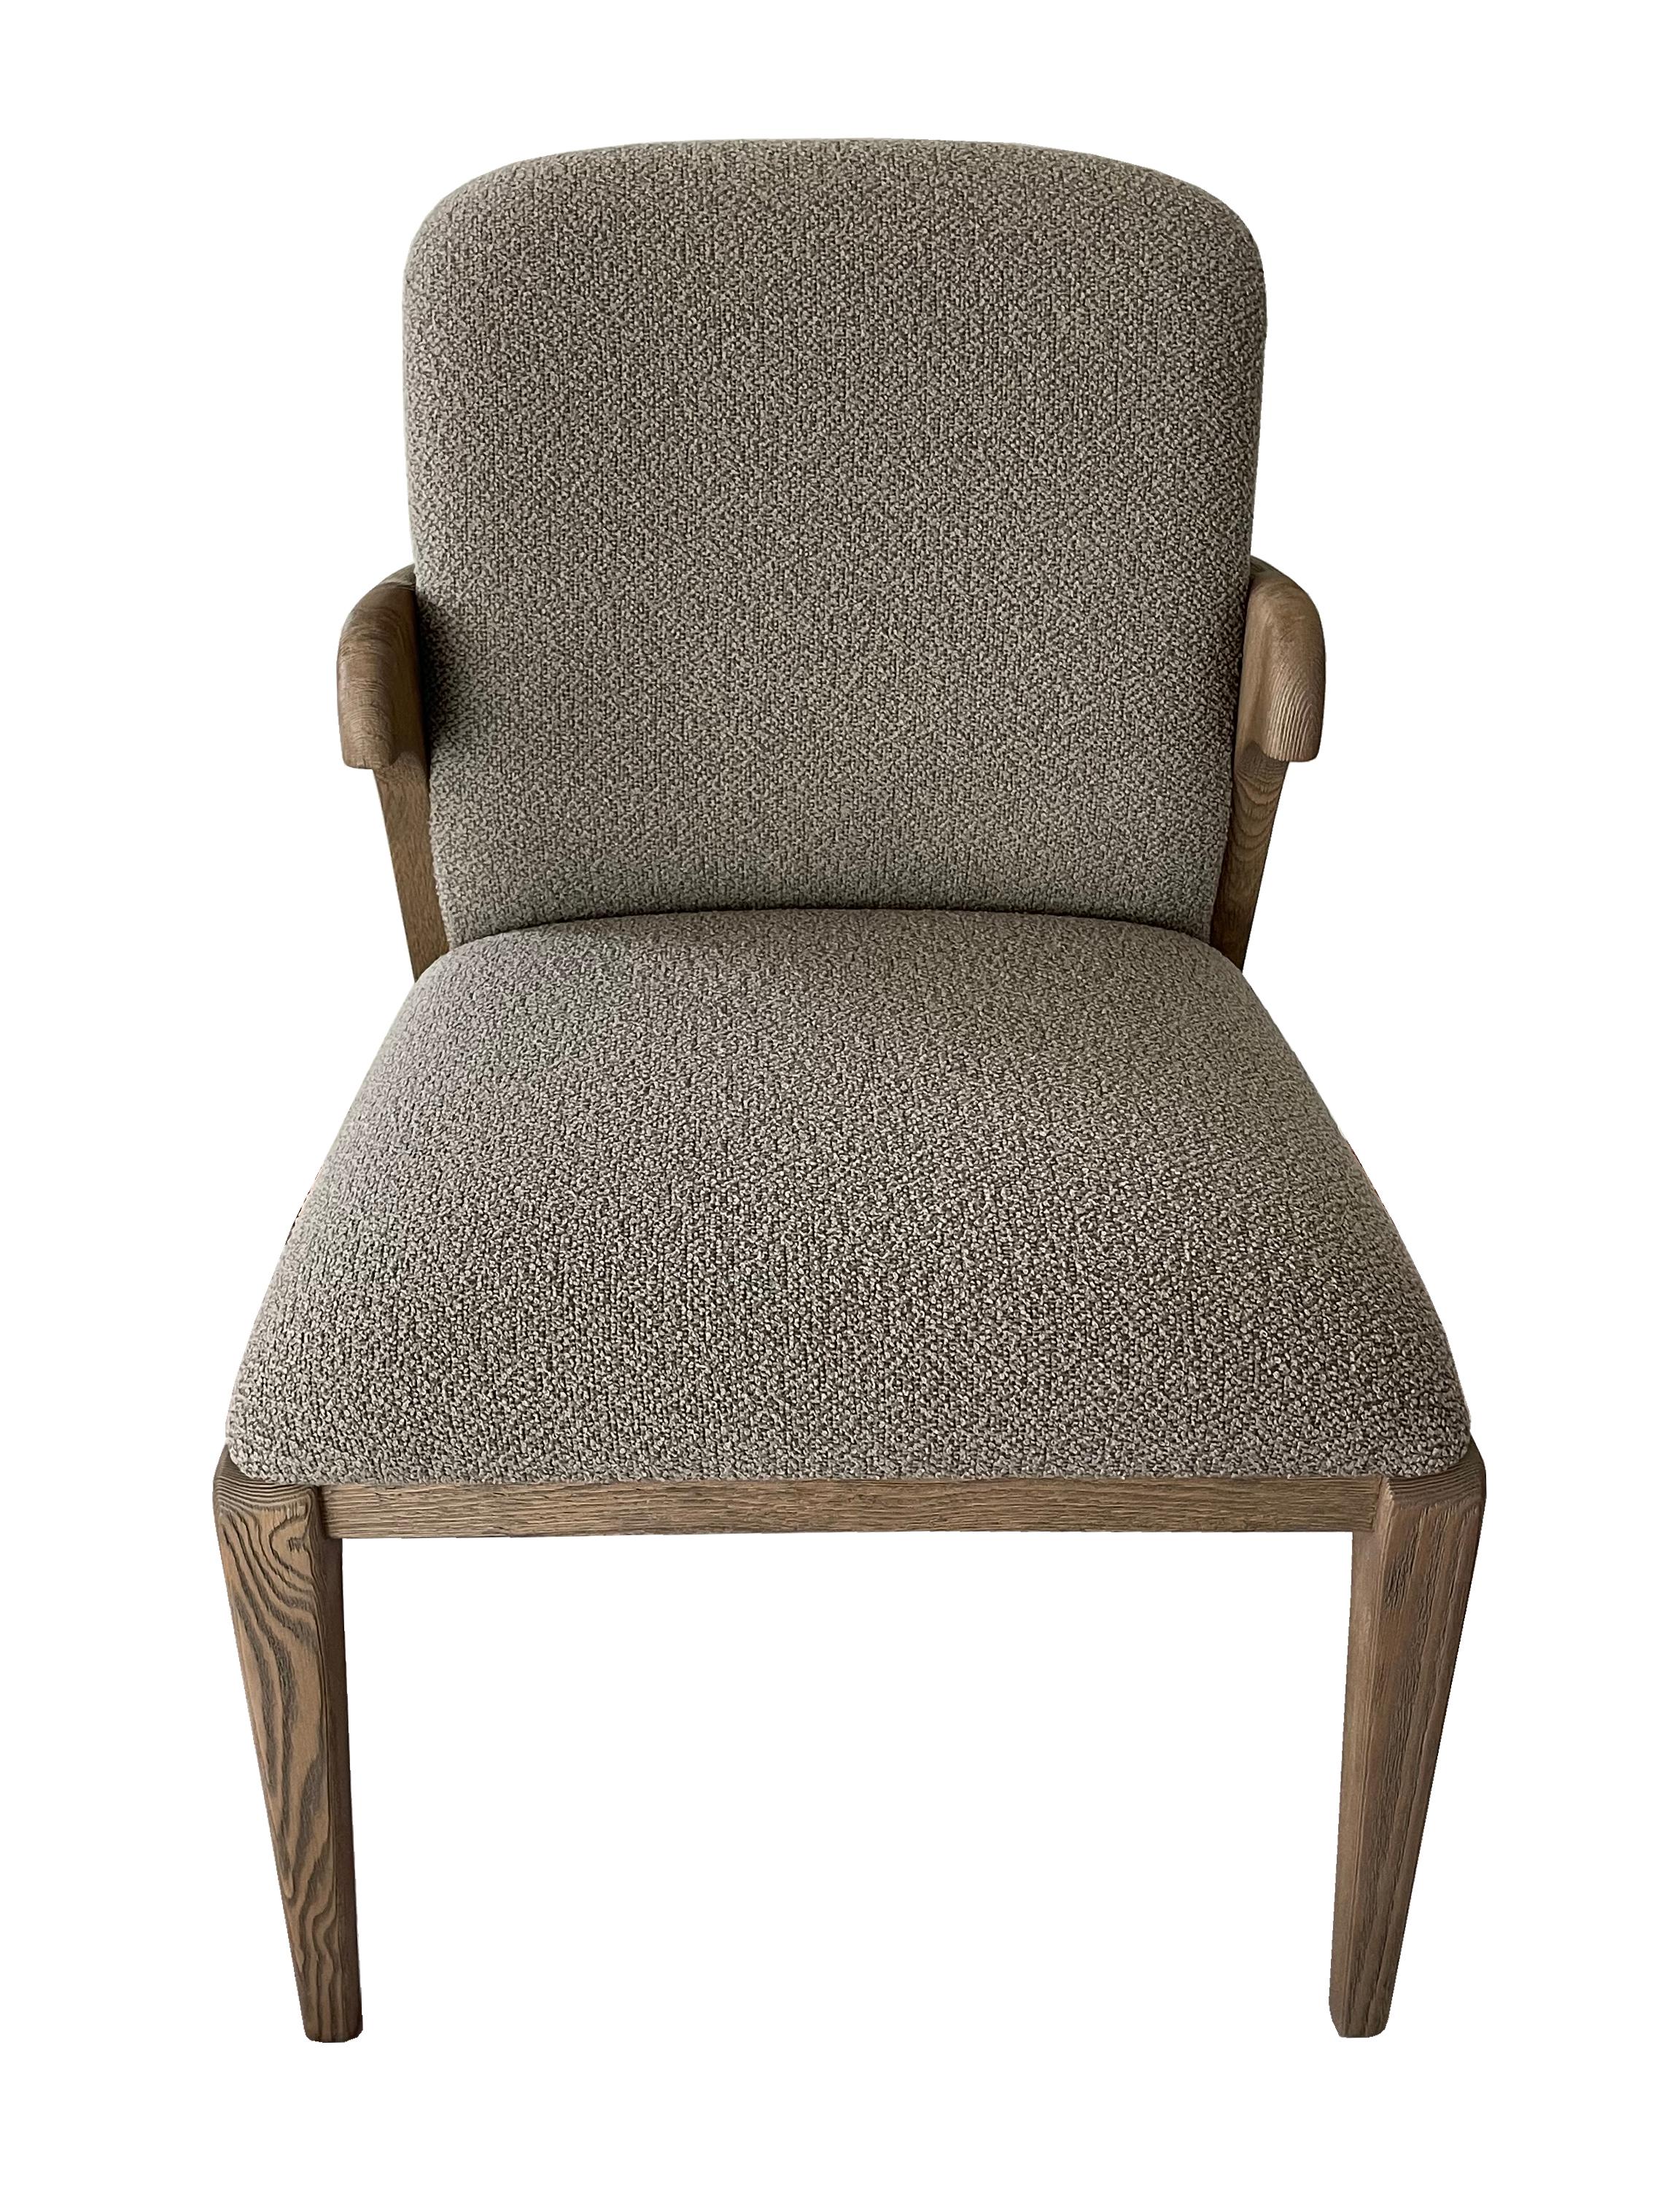 Description: Dining chair in pinewood with Loro Piana fabric
Color: Charcoal and grey dune
Size: 54 x 60 x 75.5 H cm
Material: Pinewood and Loro Piana fabric
Collection: Art Déco Garden.